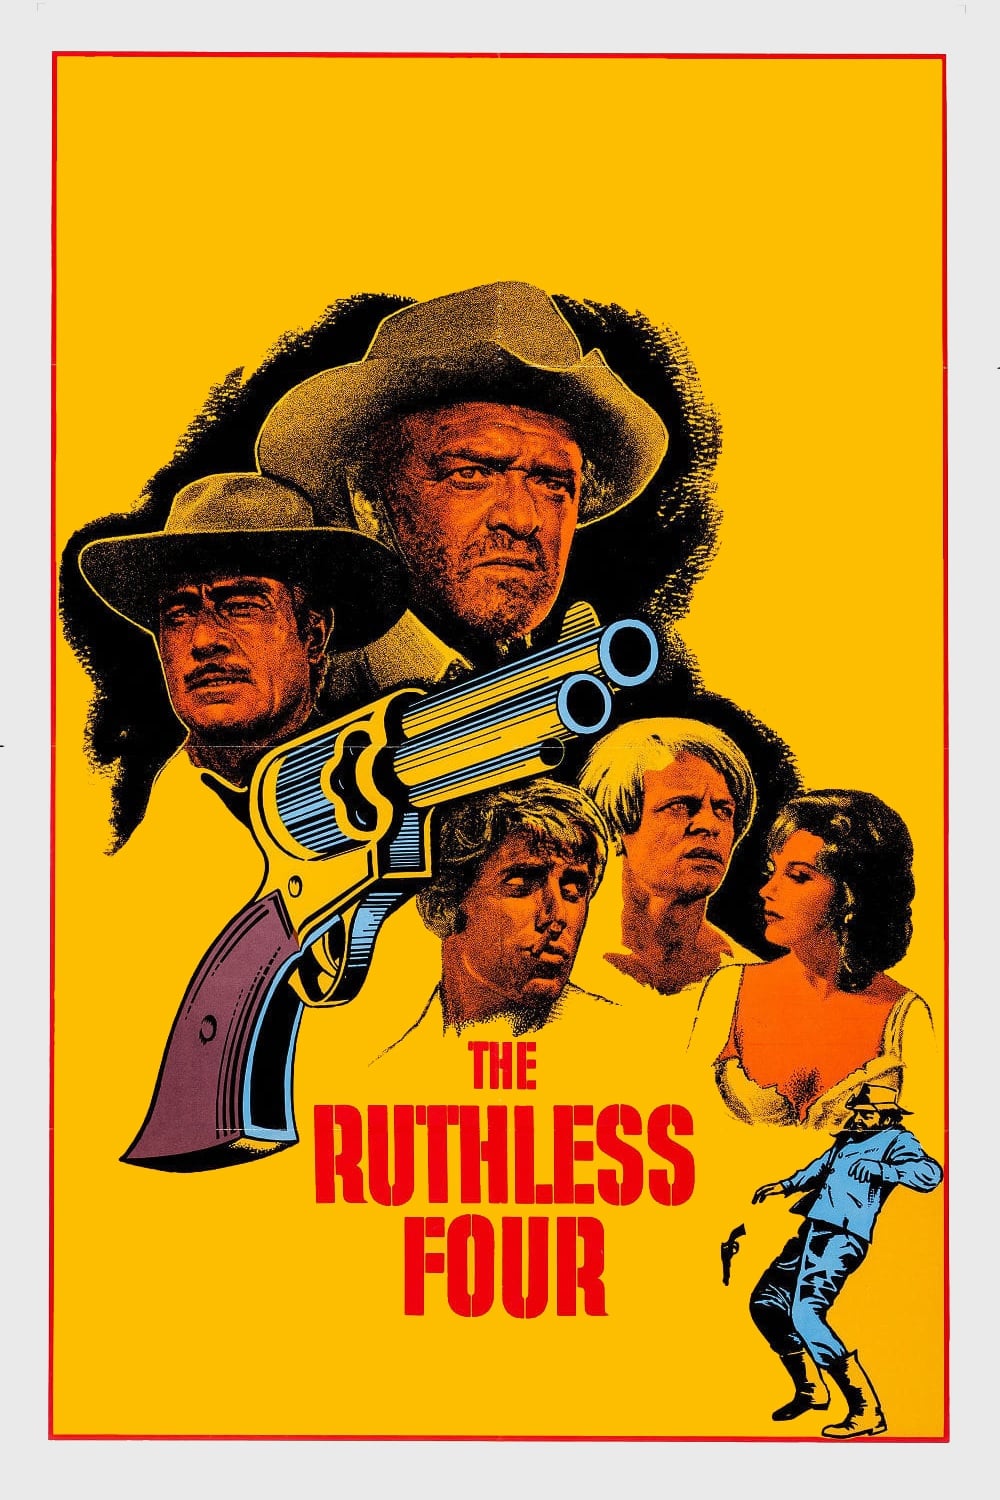 The Ruthless Four